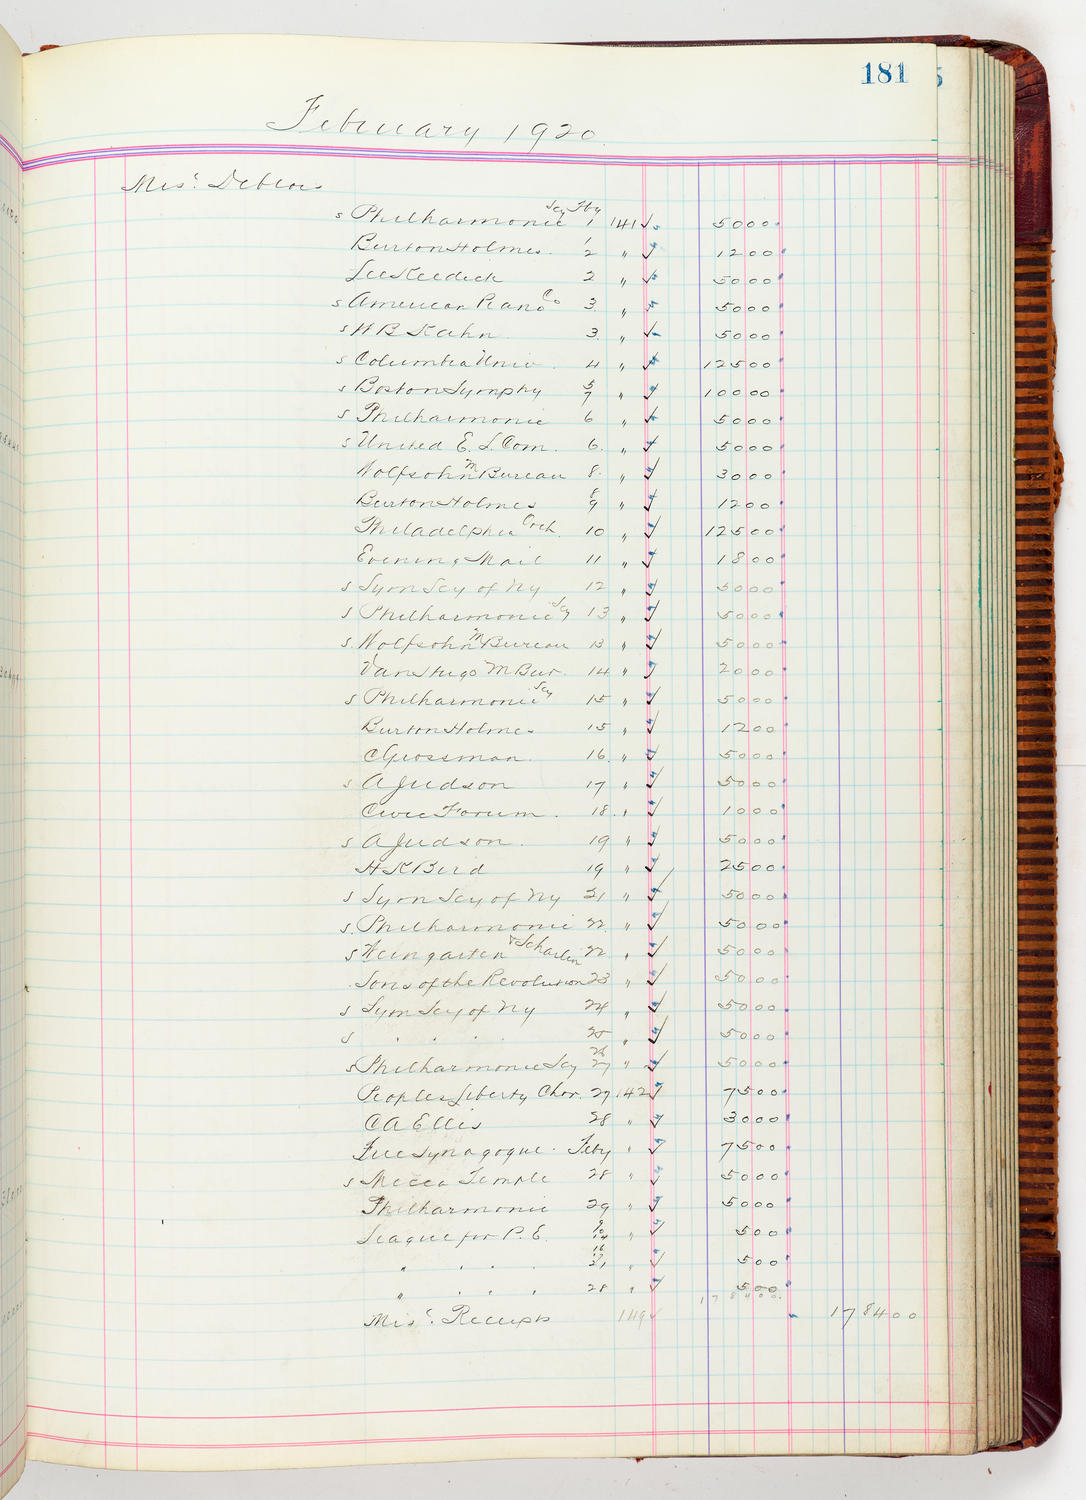 Music Hall Accounting Ledger, volume 5, page 181